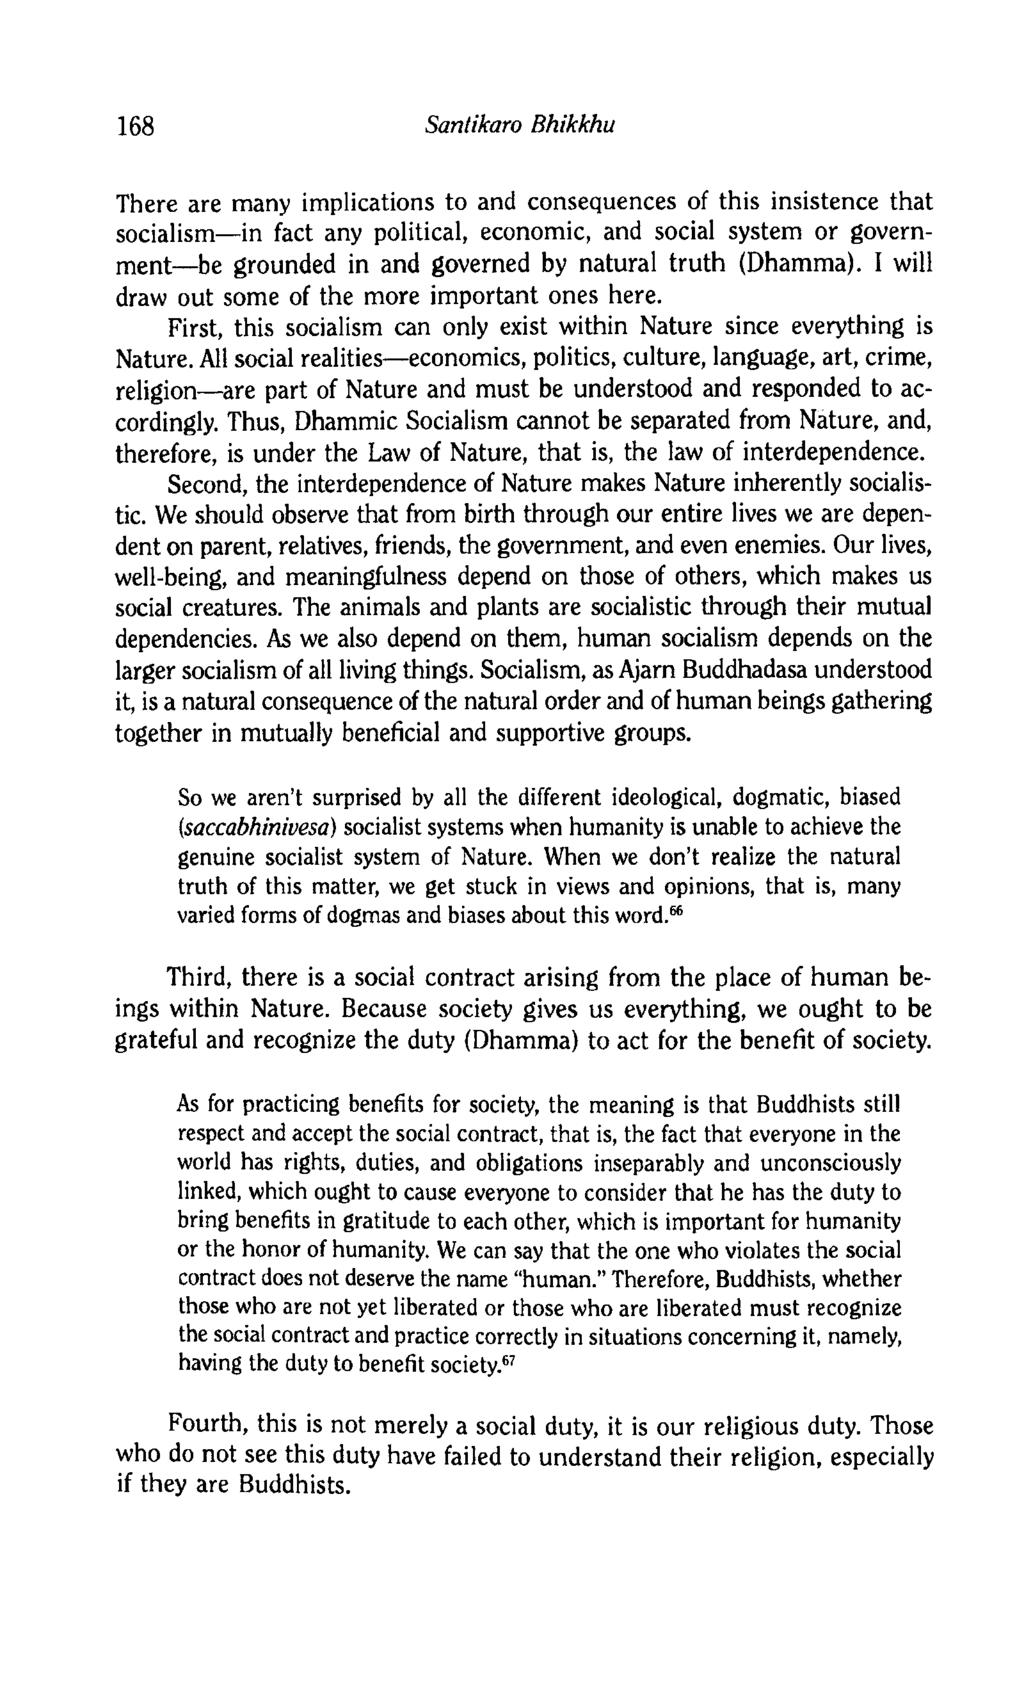 168 Santikaro Bhikkhu There are many implications to and consequences of this insistence that socialism in fact any political, economic, and social system or government be grounded in and governed by